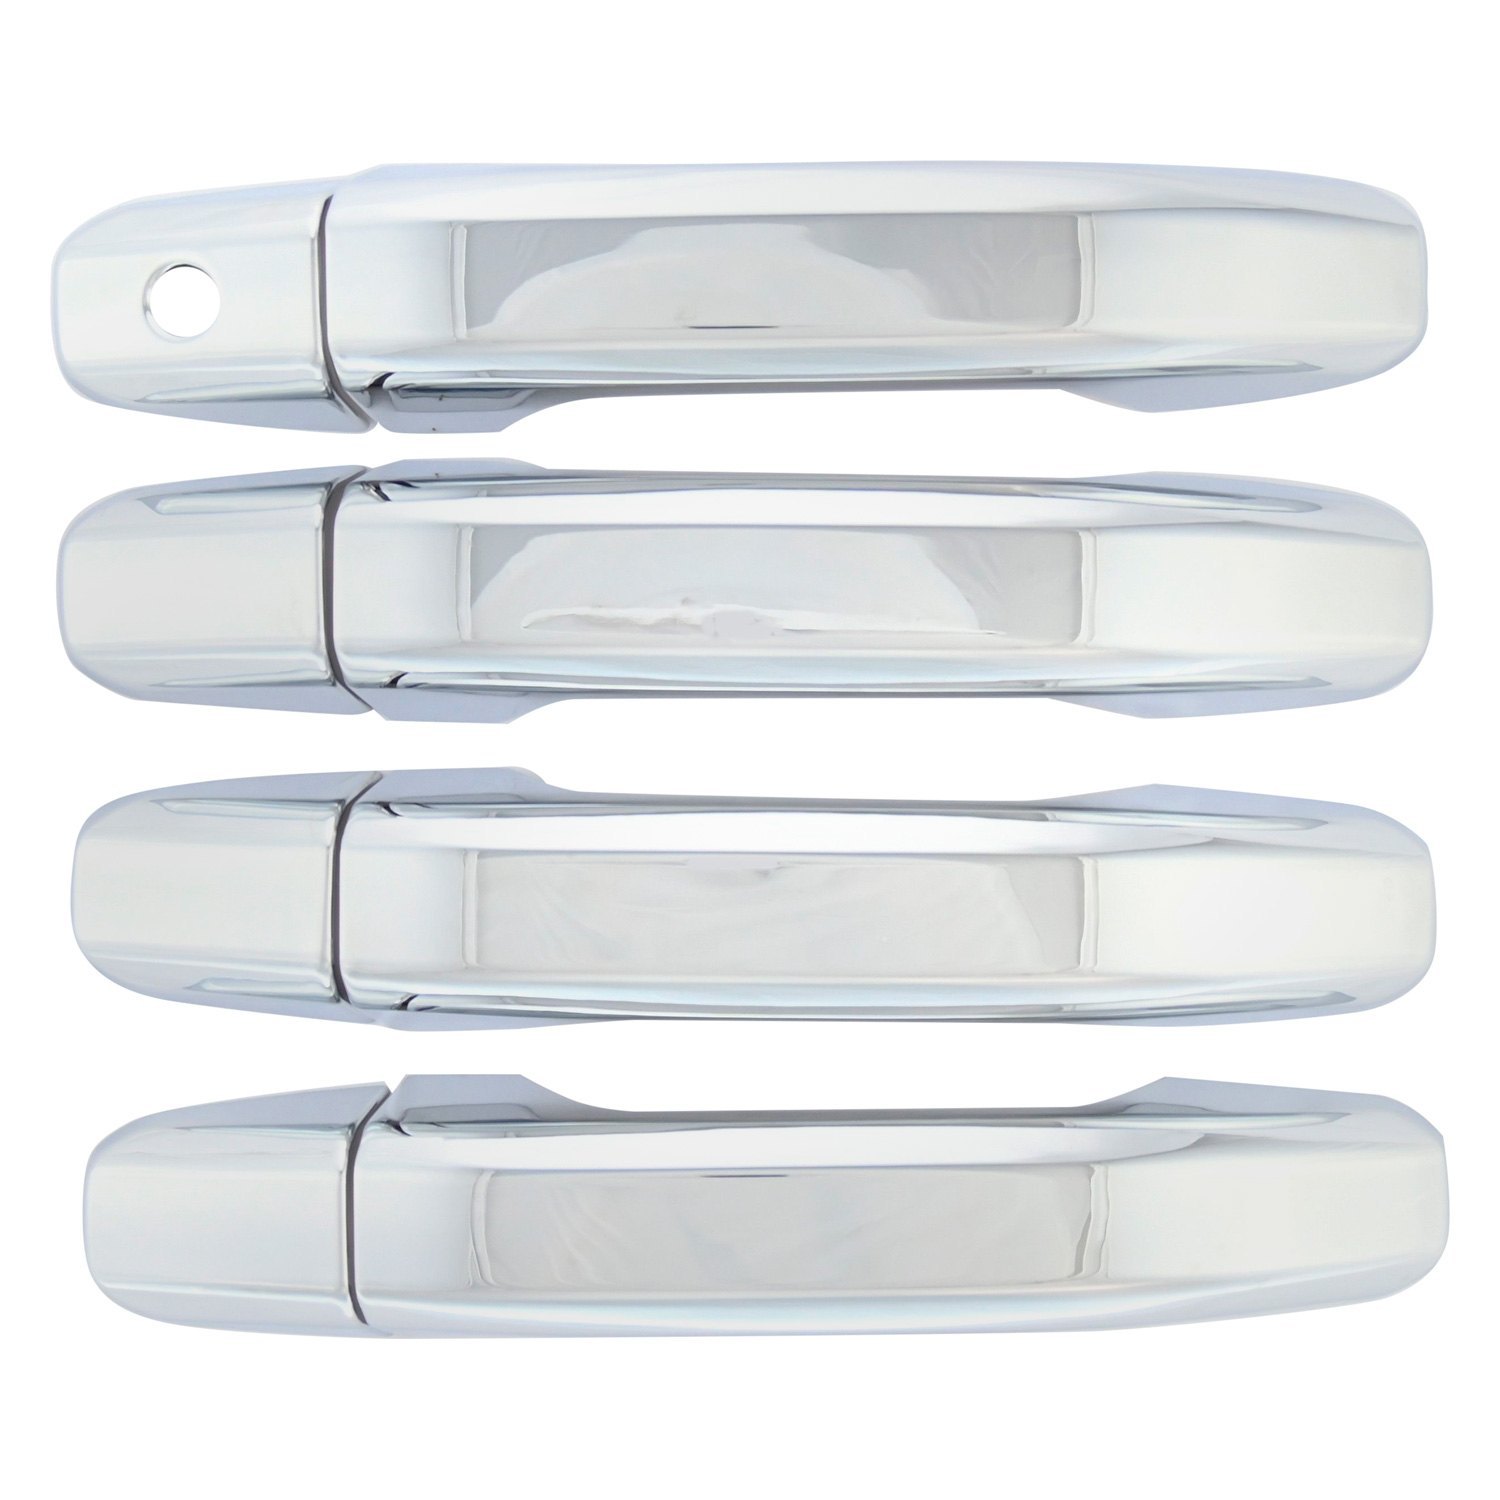 2019-2024 Trim-Illusion Patented Snap-On Chrome Door Handle Cover